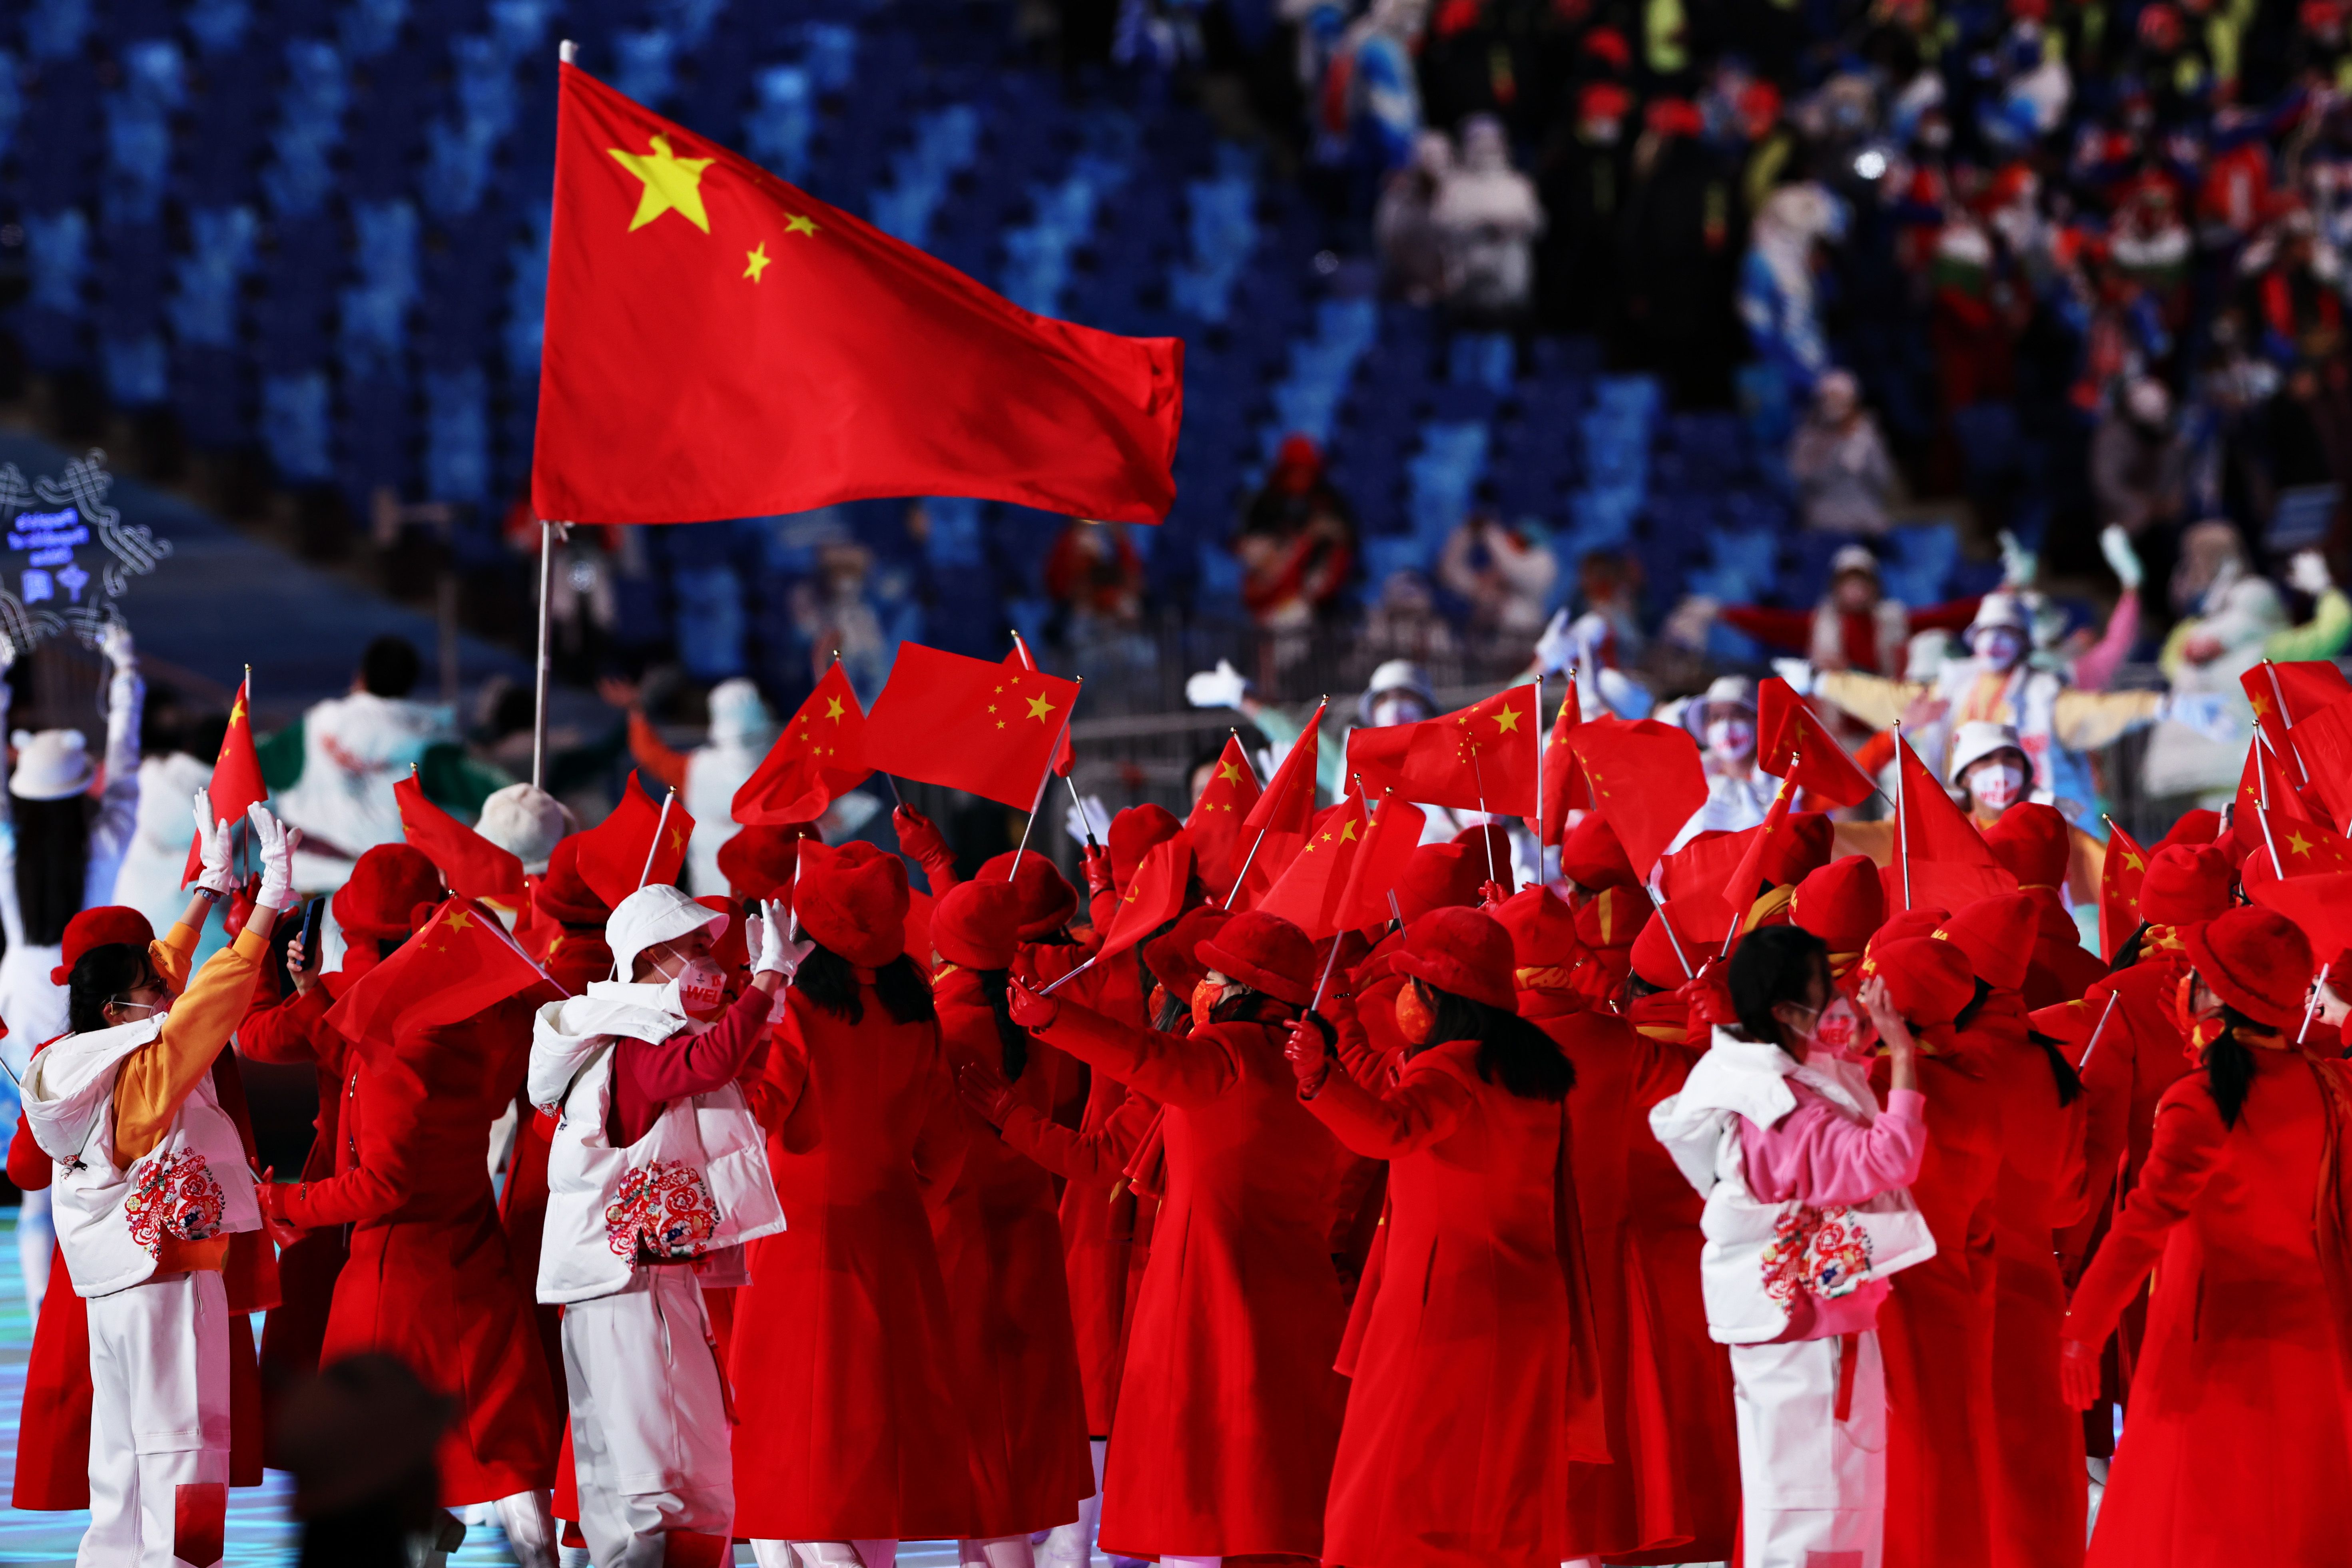 Members of Team China wave flags during the Opening Ceremony of the Beijing 2022 Winter Olympics 